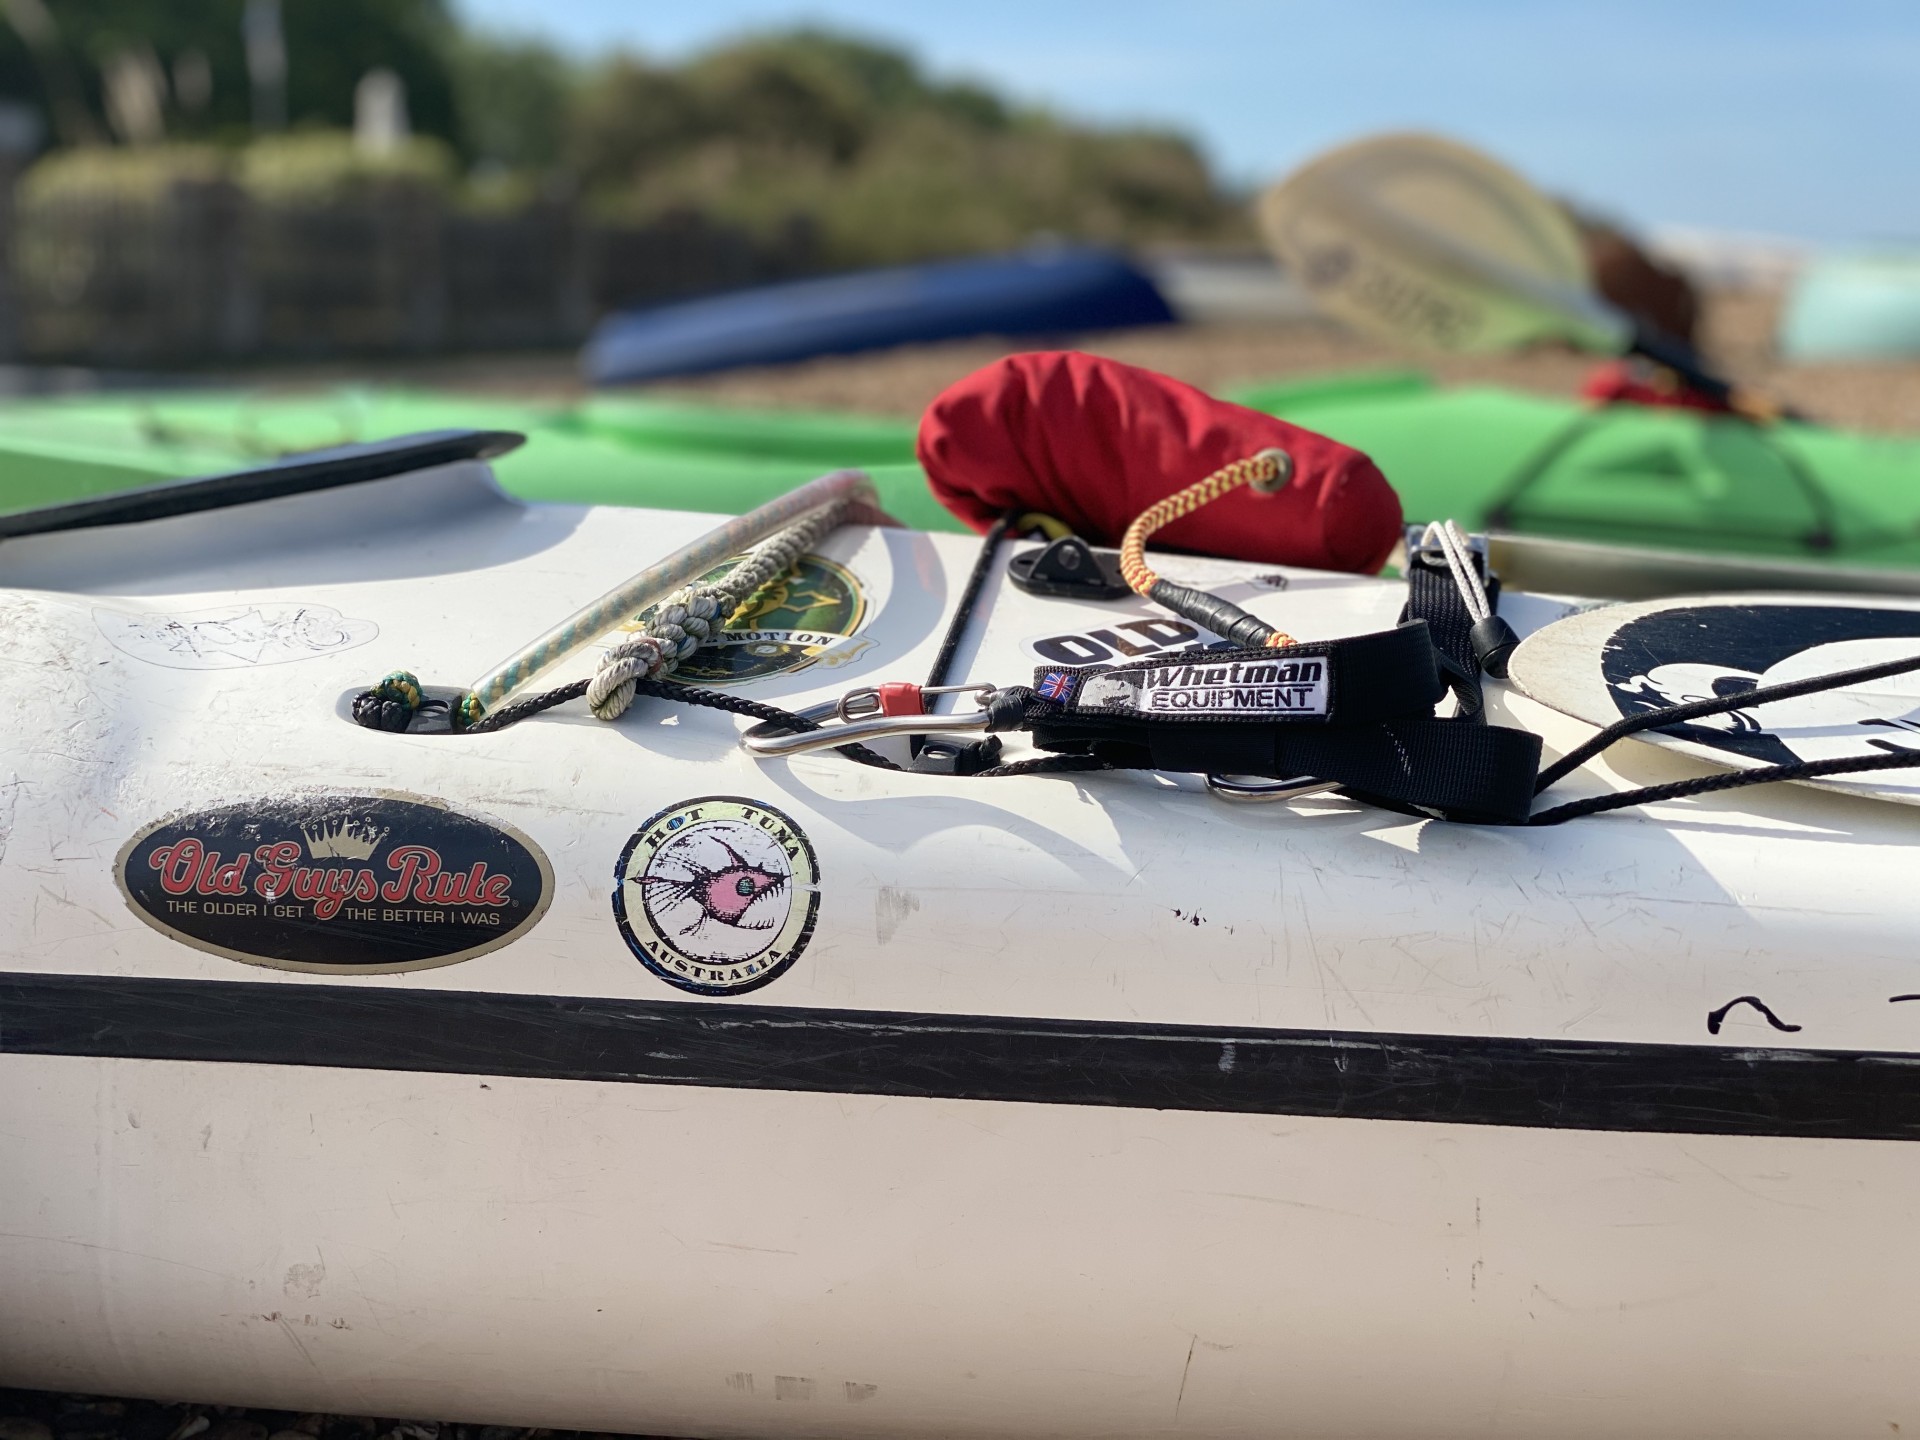 Whetman Limpet Throwline rescue equipment with NOMAD Sea Kayaking.